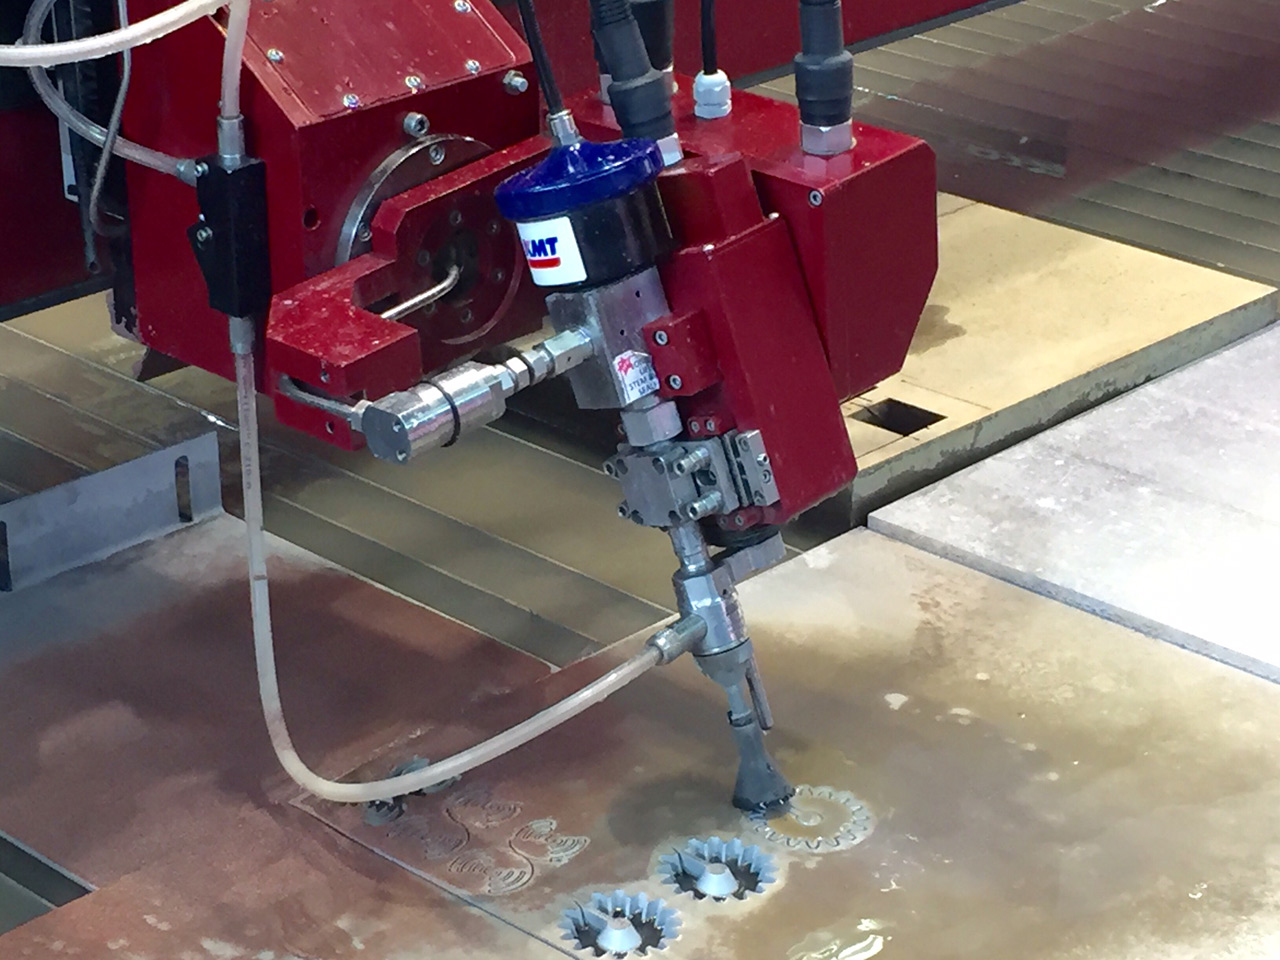 Waterjet 5-Axis Cutting Head in Action